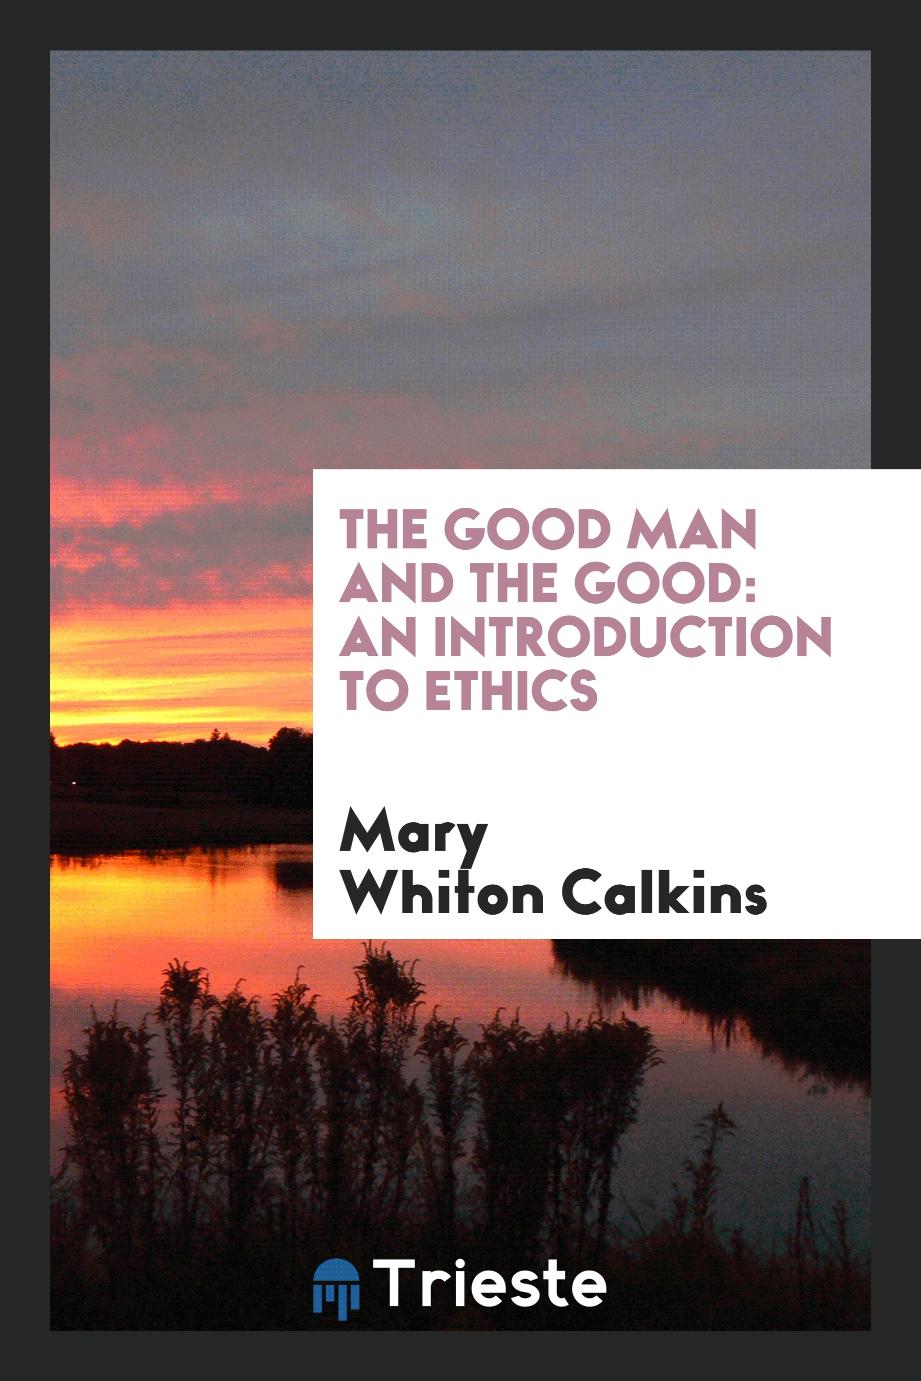 The Good Man and the Good: An Introduction to Ethics